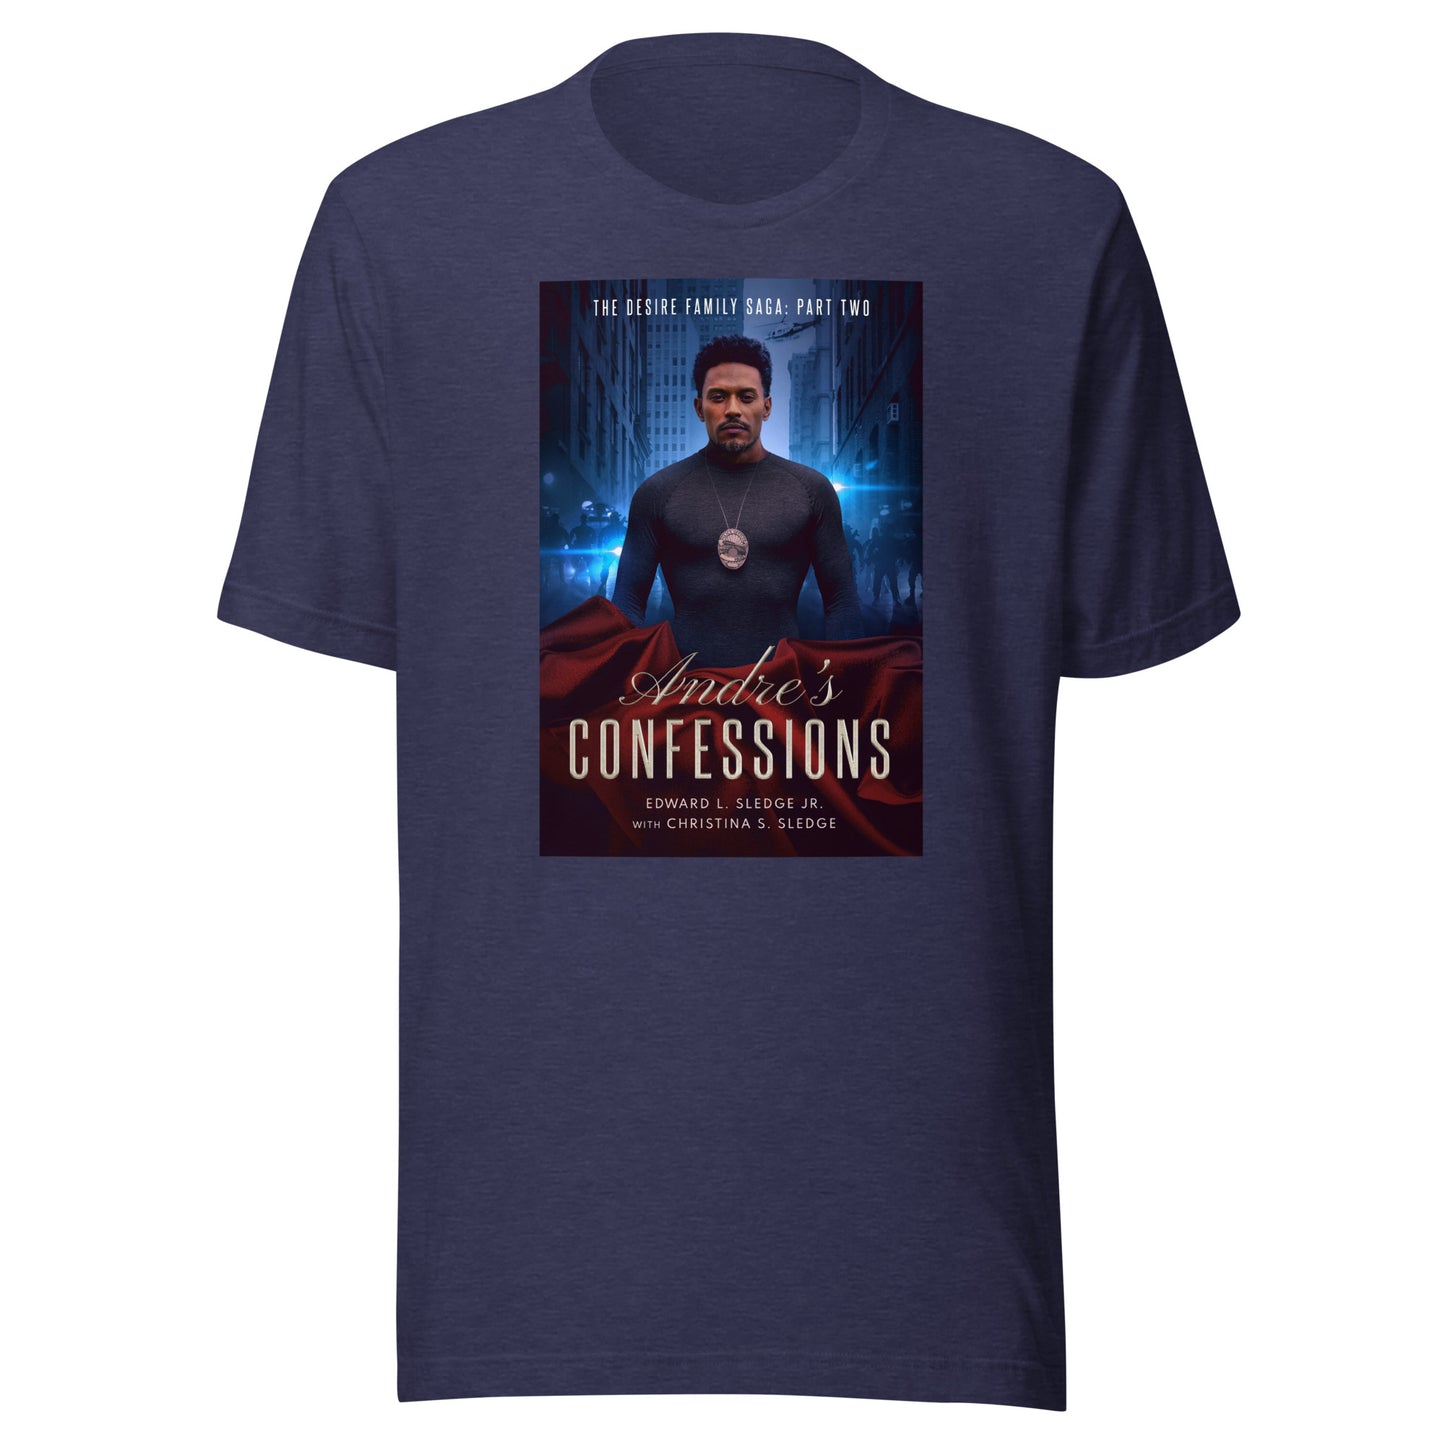 Andre's Confessions Unisex T-Shirt